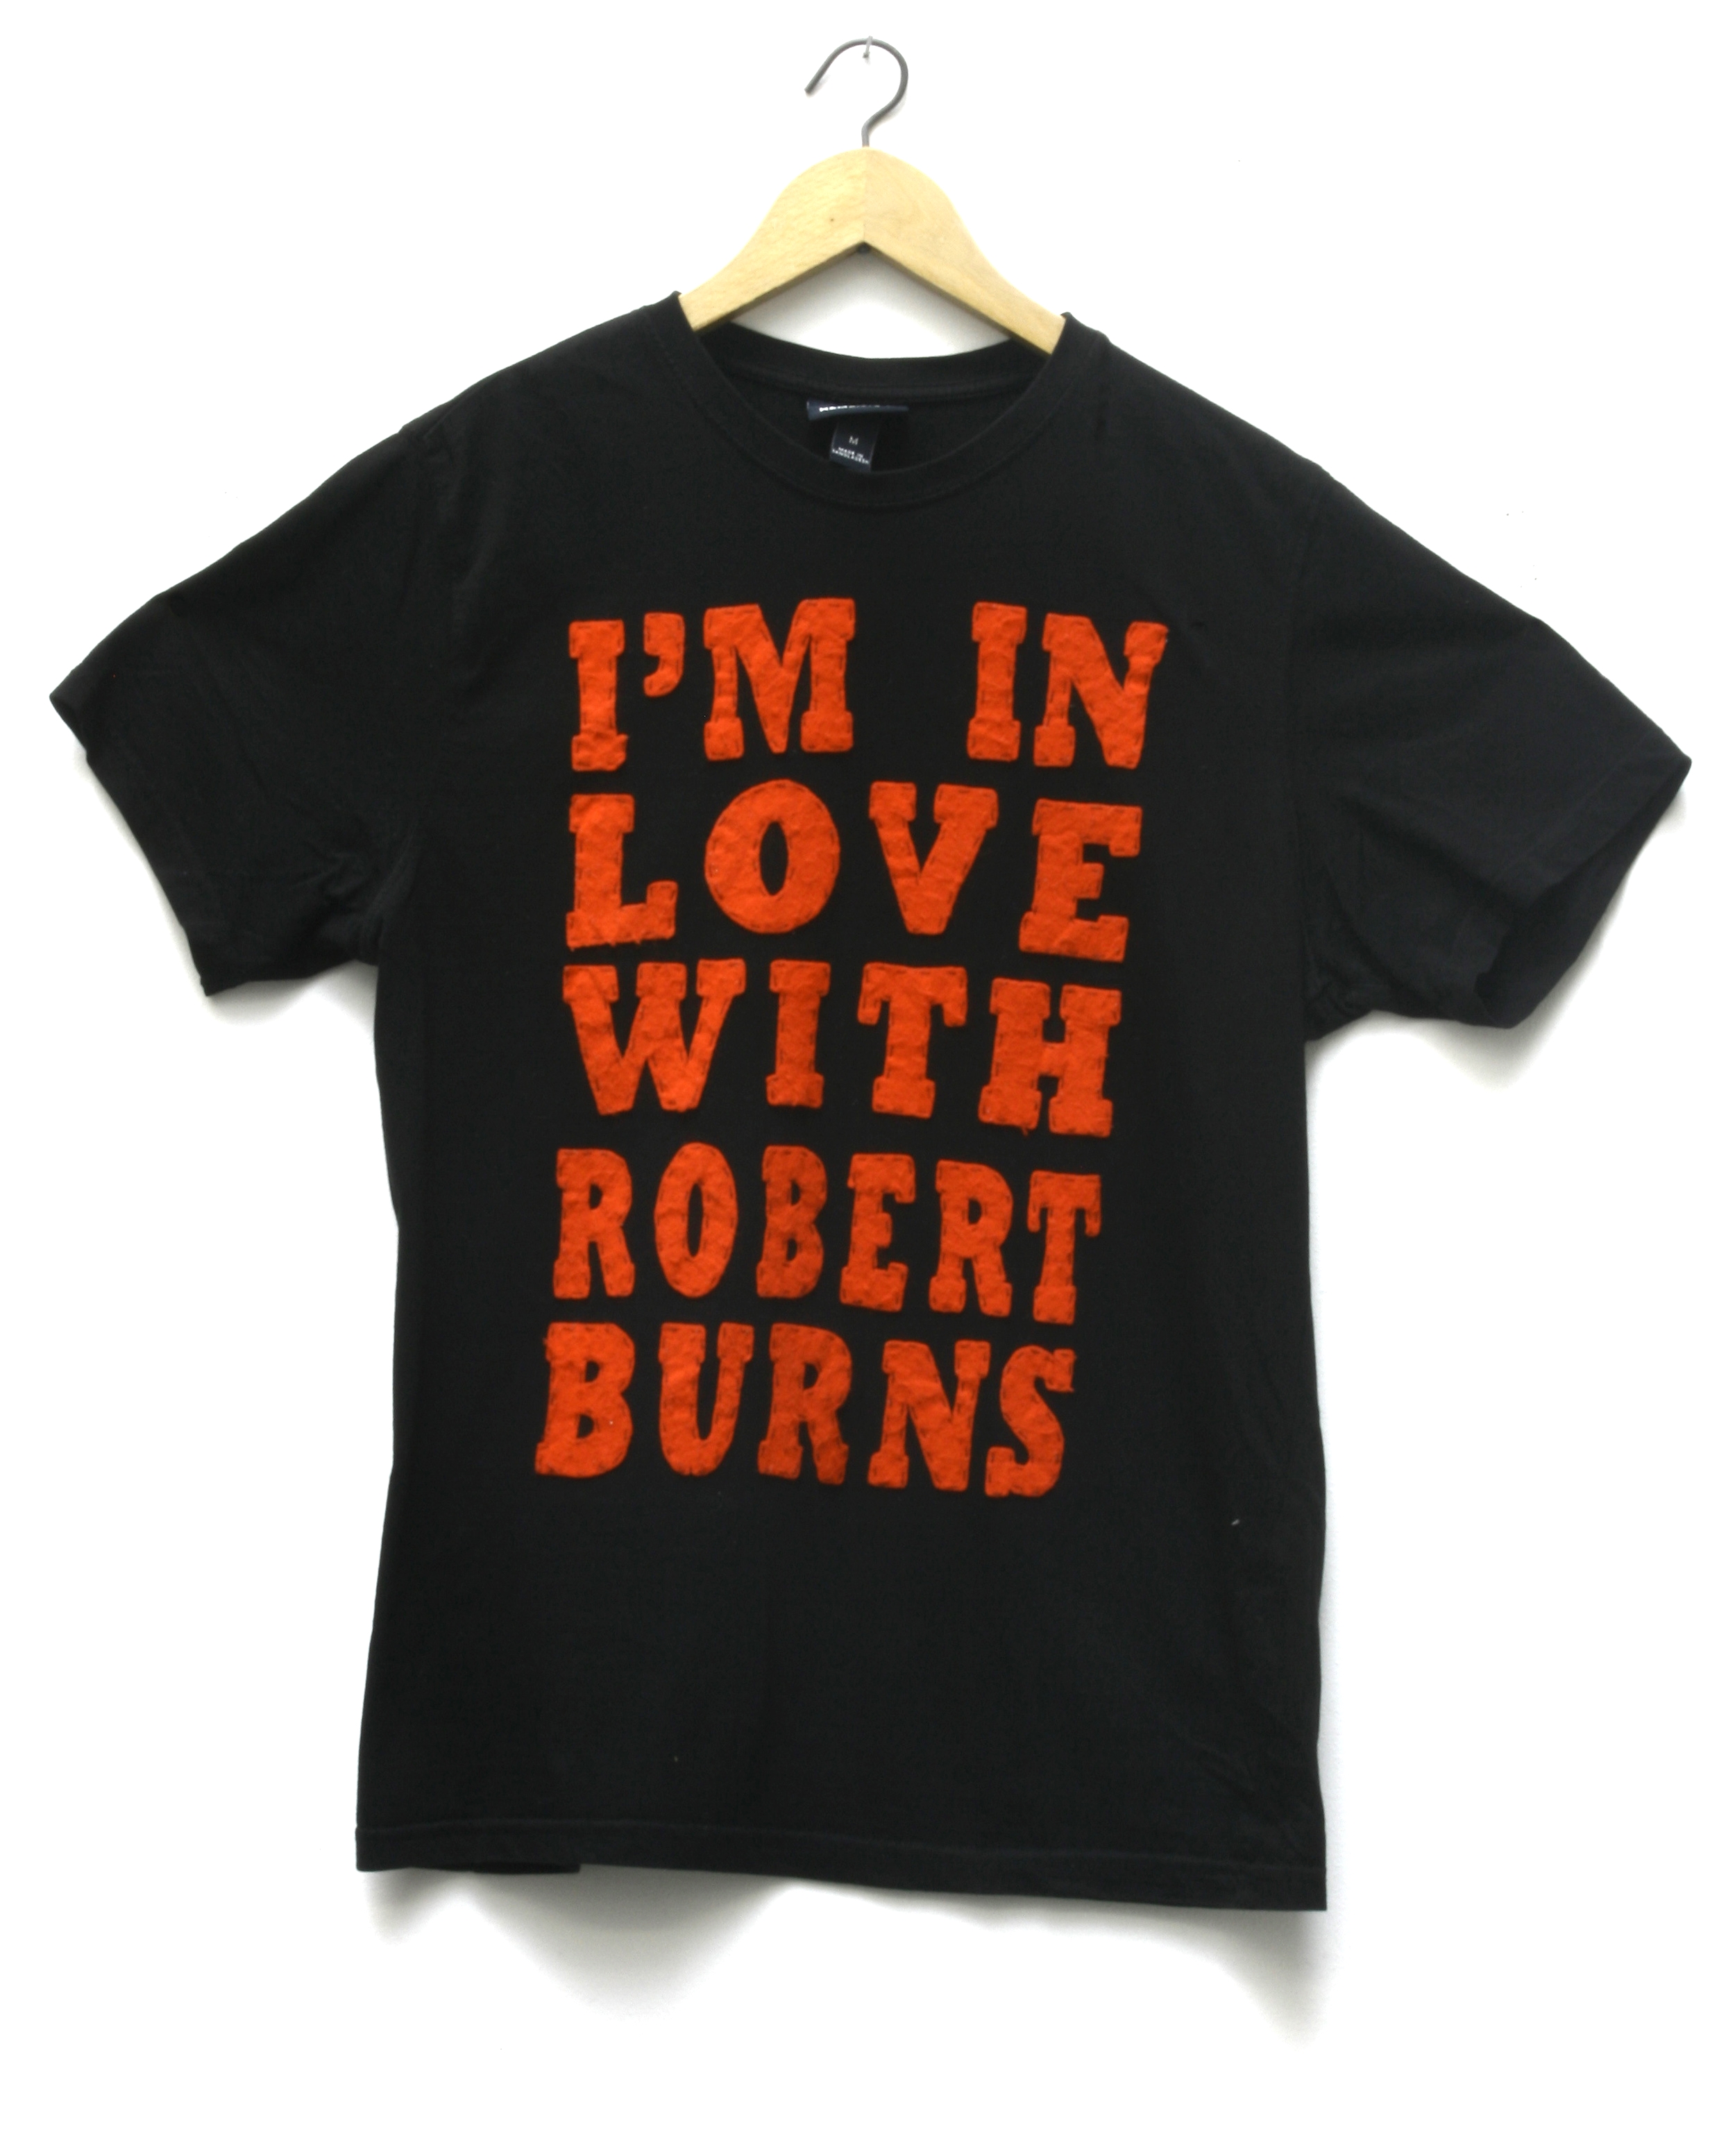 I'm in Love with Robert Burns - 2005